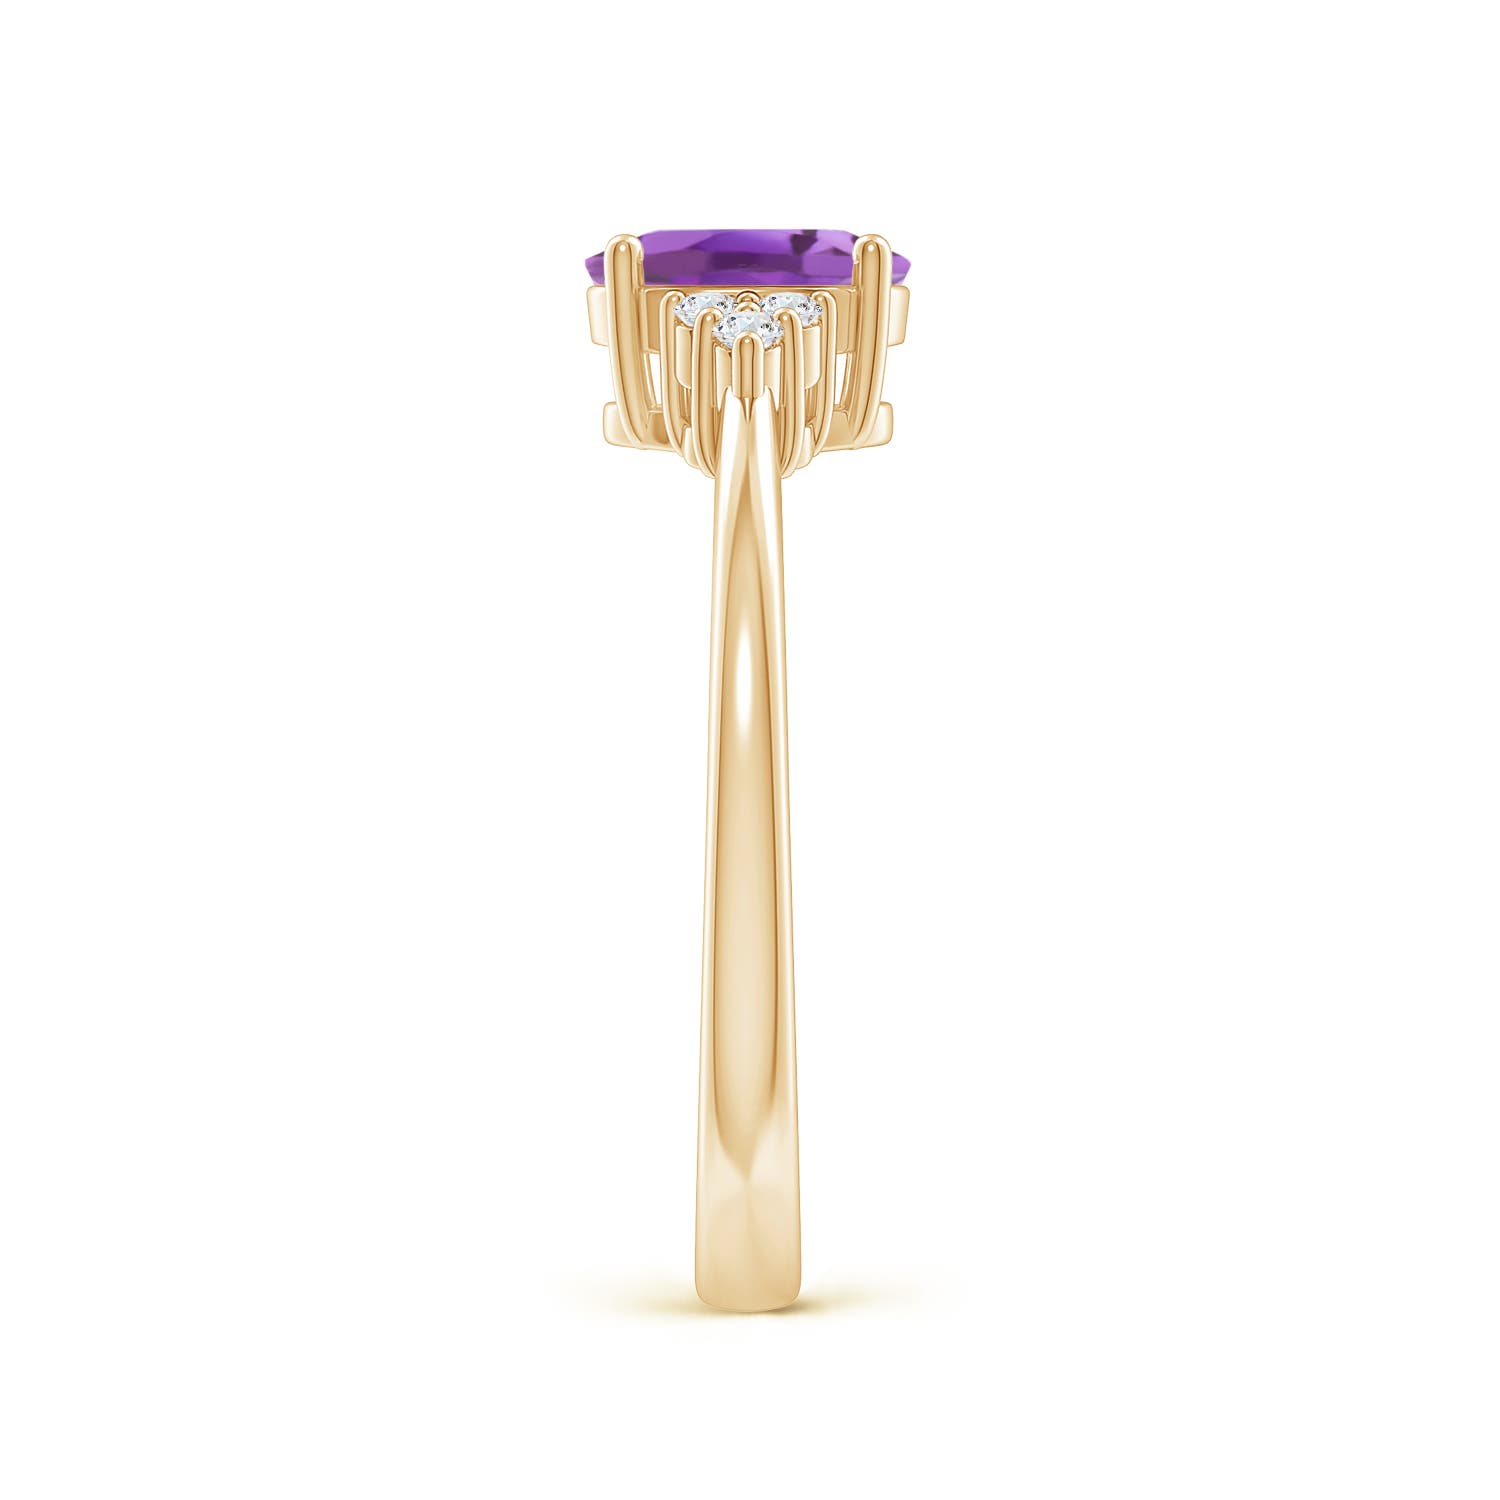 A - Amethyst / 0.78 CT / 14 KT Yellow Gold